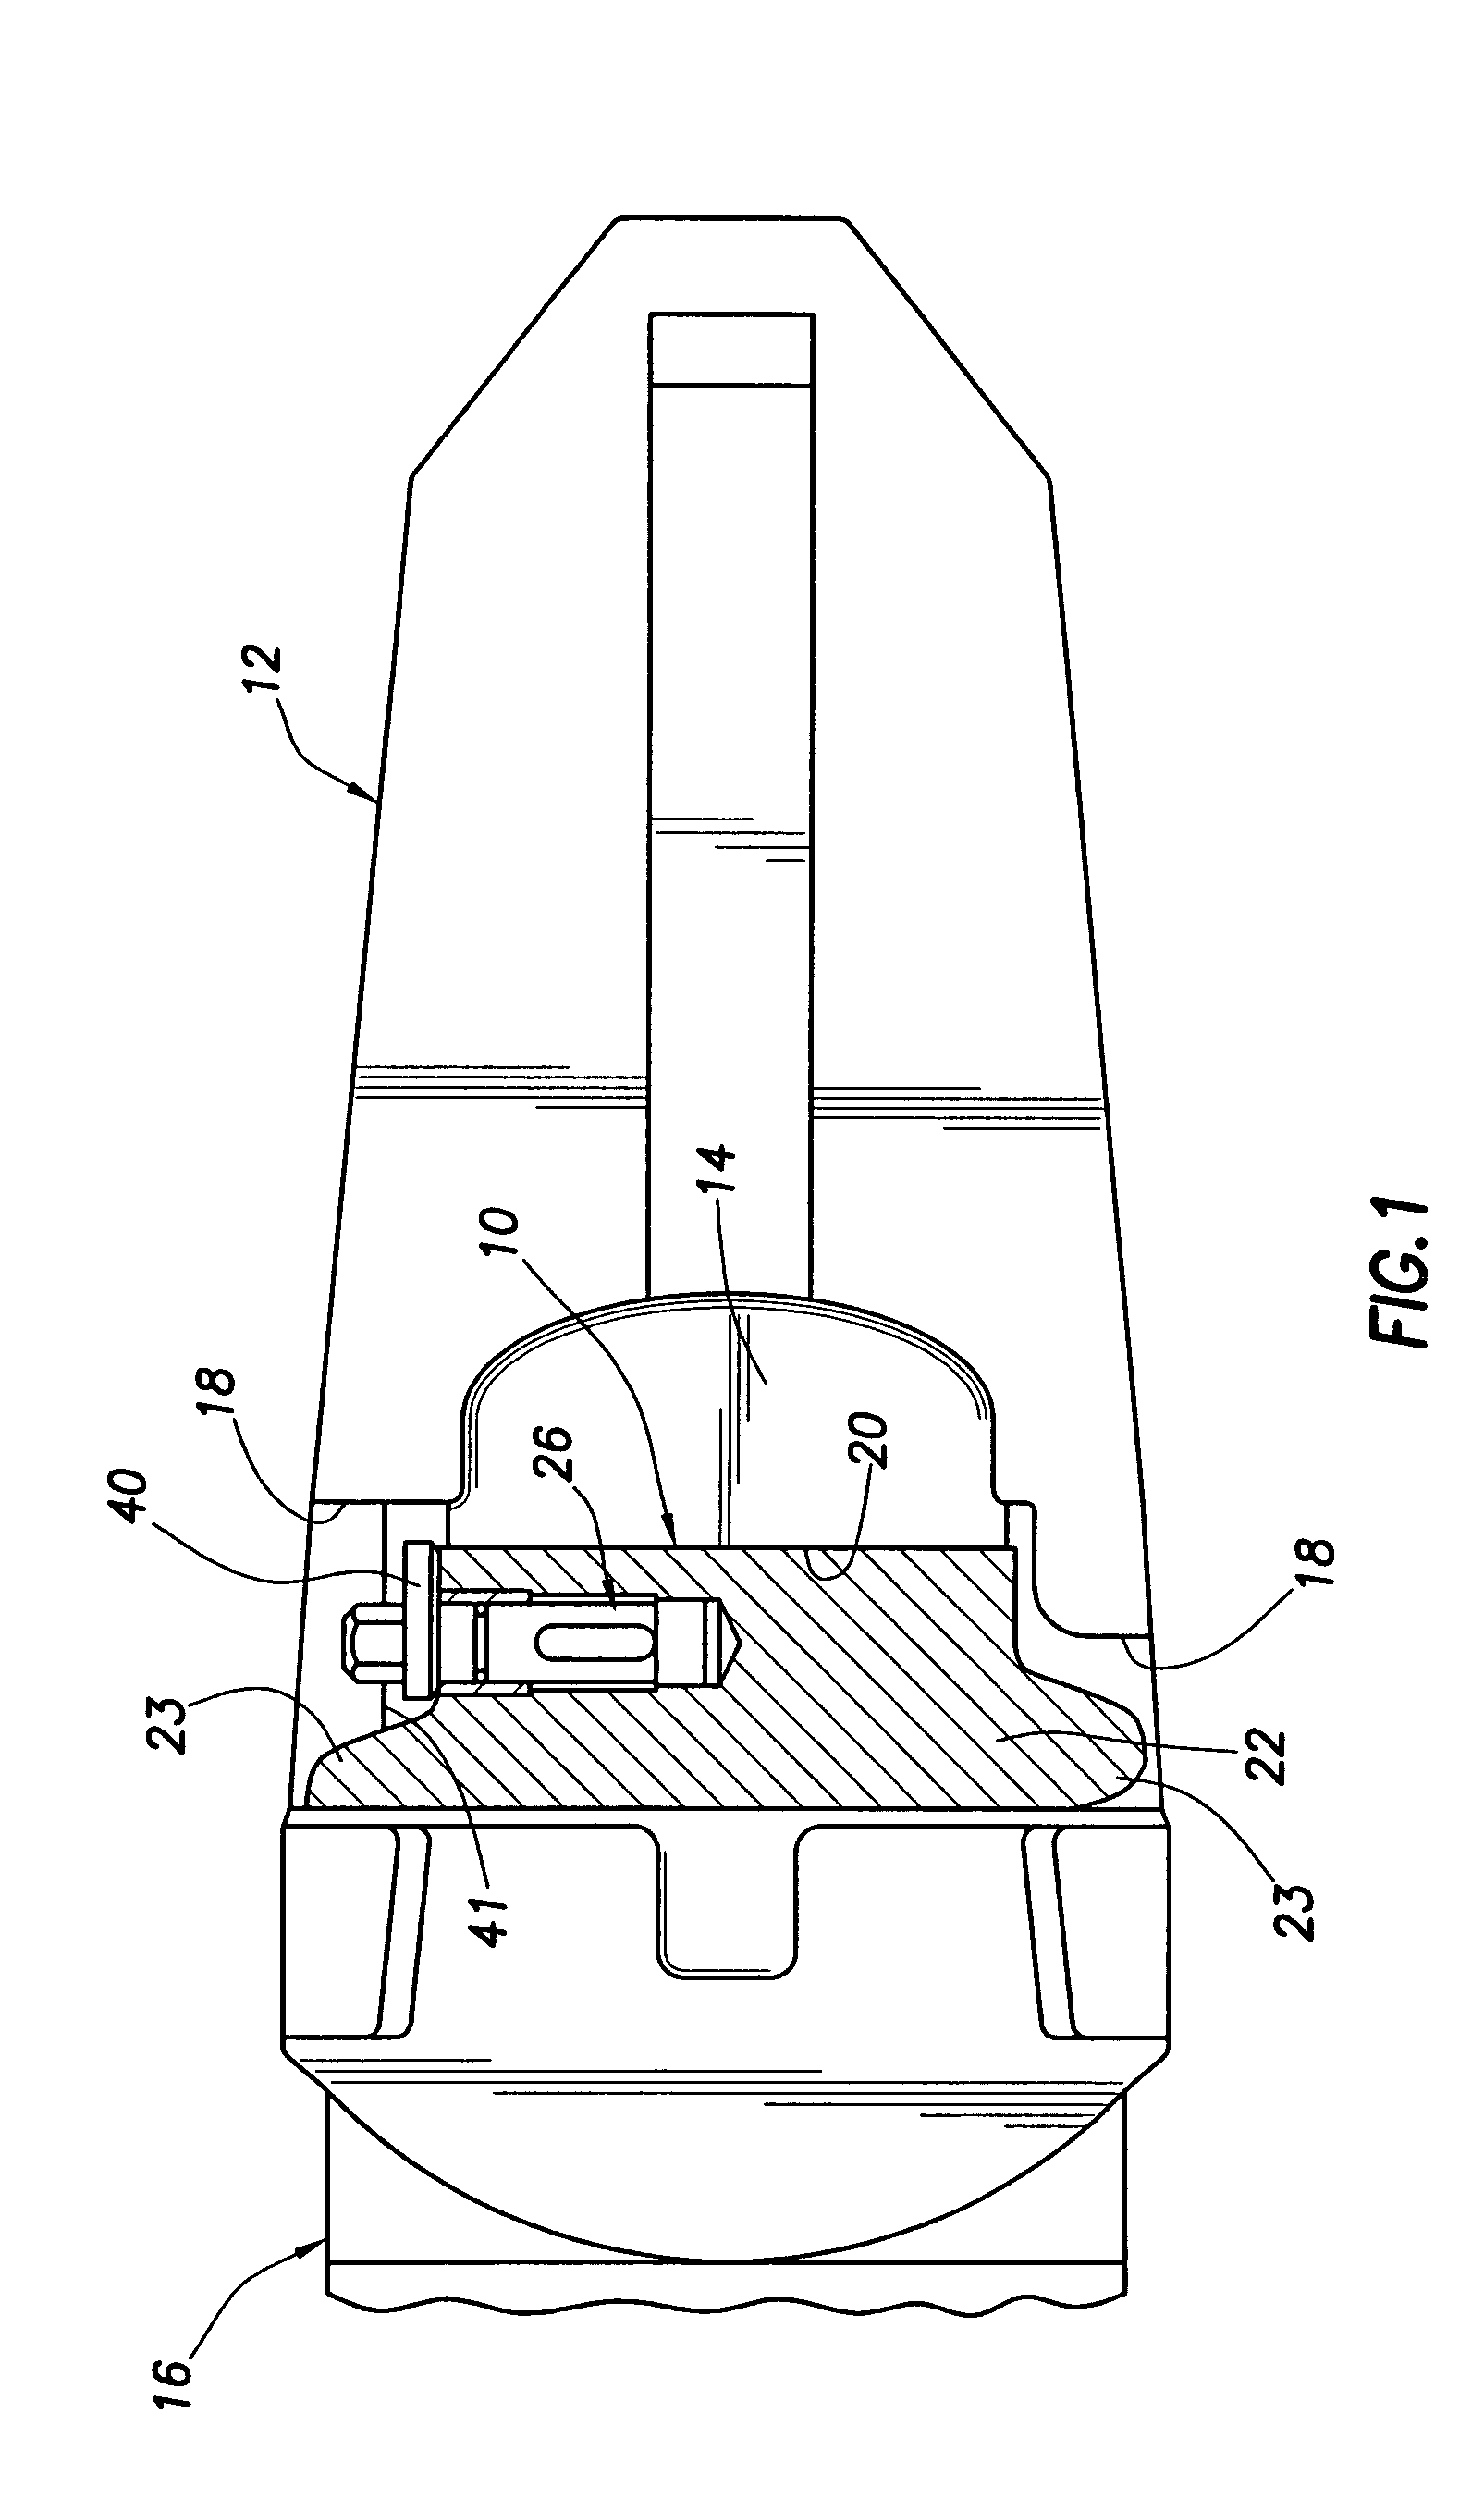 Connector pin assembly and associated apparatus